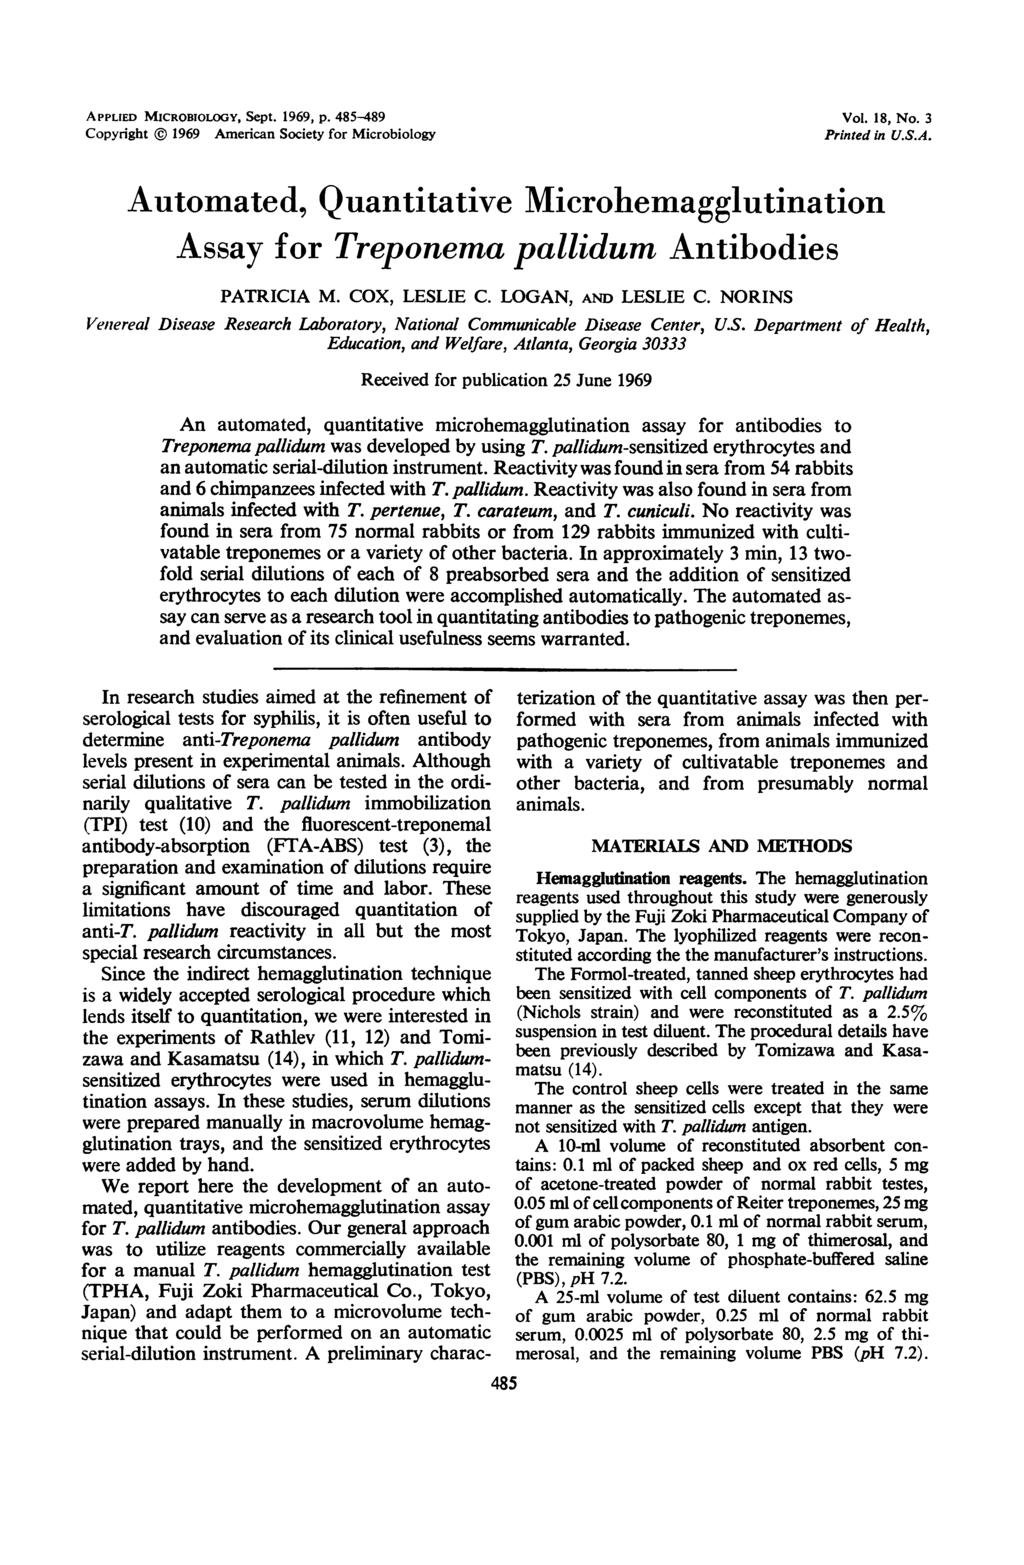 APPLIED MICROBIOLOGY, Sept. 1969, p. 485-489 Copyright ( 1969 American Society for Microbiology Vol. 18, No. 3 Printed in U.S.A. Automated, Quantitative Microhemagglutination Assay for Treponema pallidum Antibodies PATRICIA M.